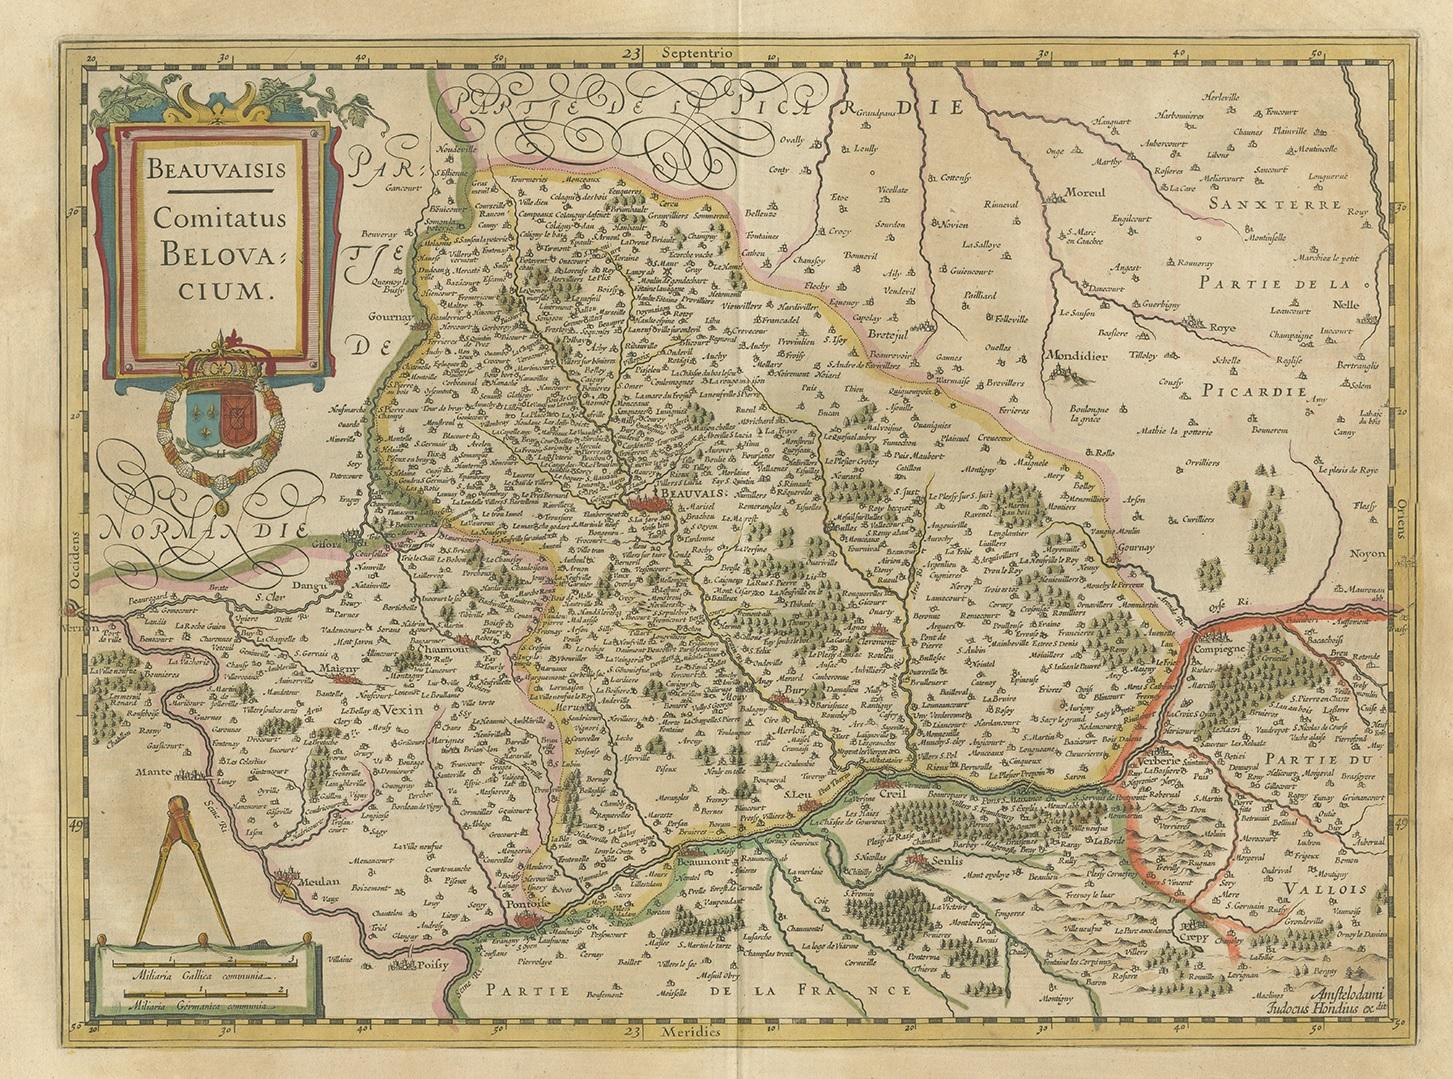 Antique map titled 'Beauvaisis - Comitatus Belovacium'. Old map of the region of Beauvais, France. This map originates from a composite atlas and is signed by J. Hondius.